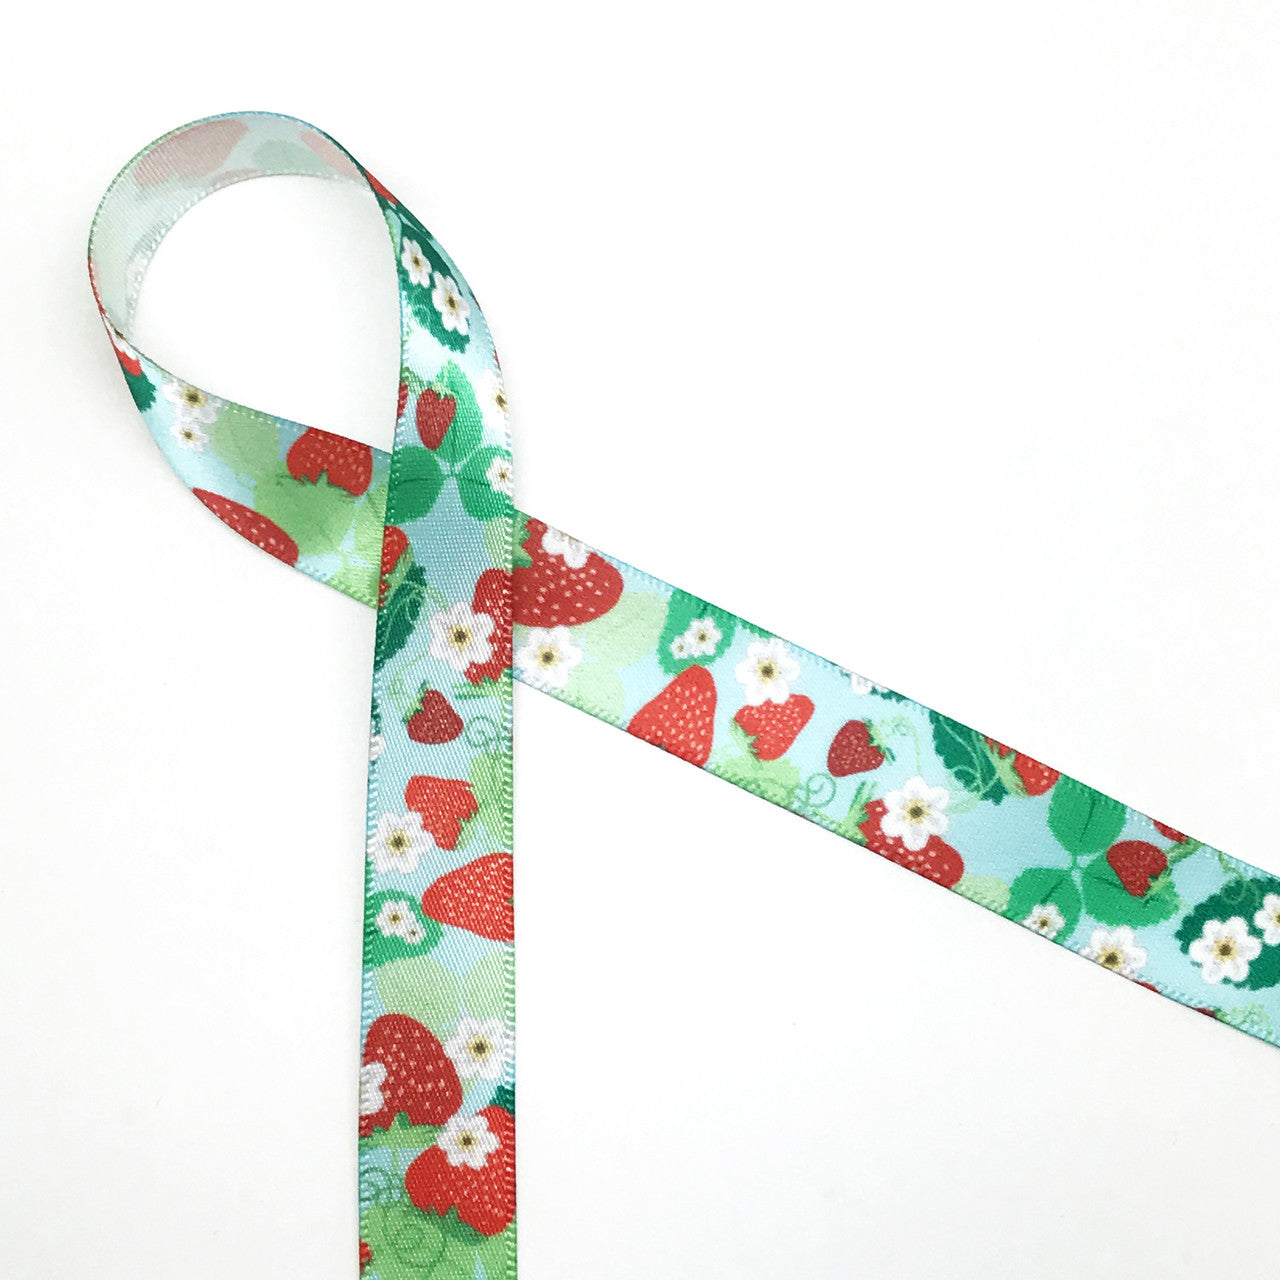 Strawberry pattern with a light blue background printed on 5/8" Single Face Satin ribbon on 10 yard spools